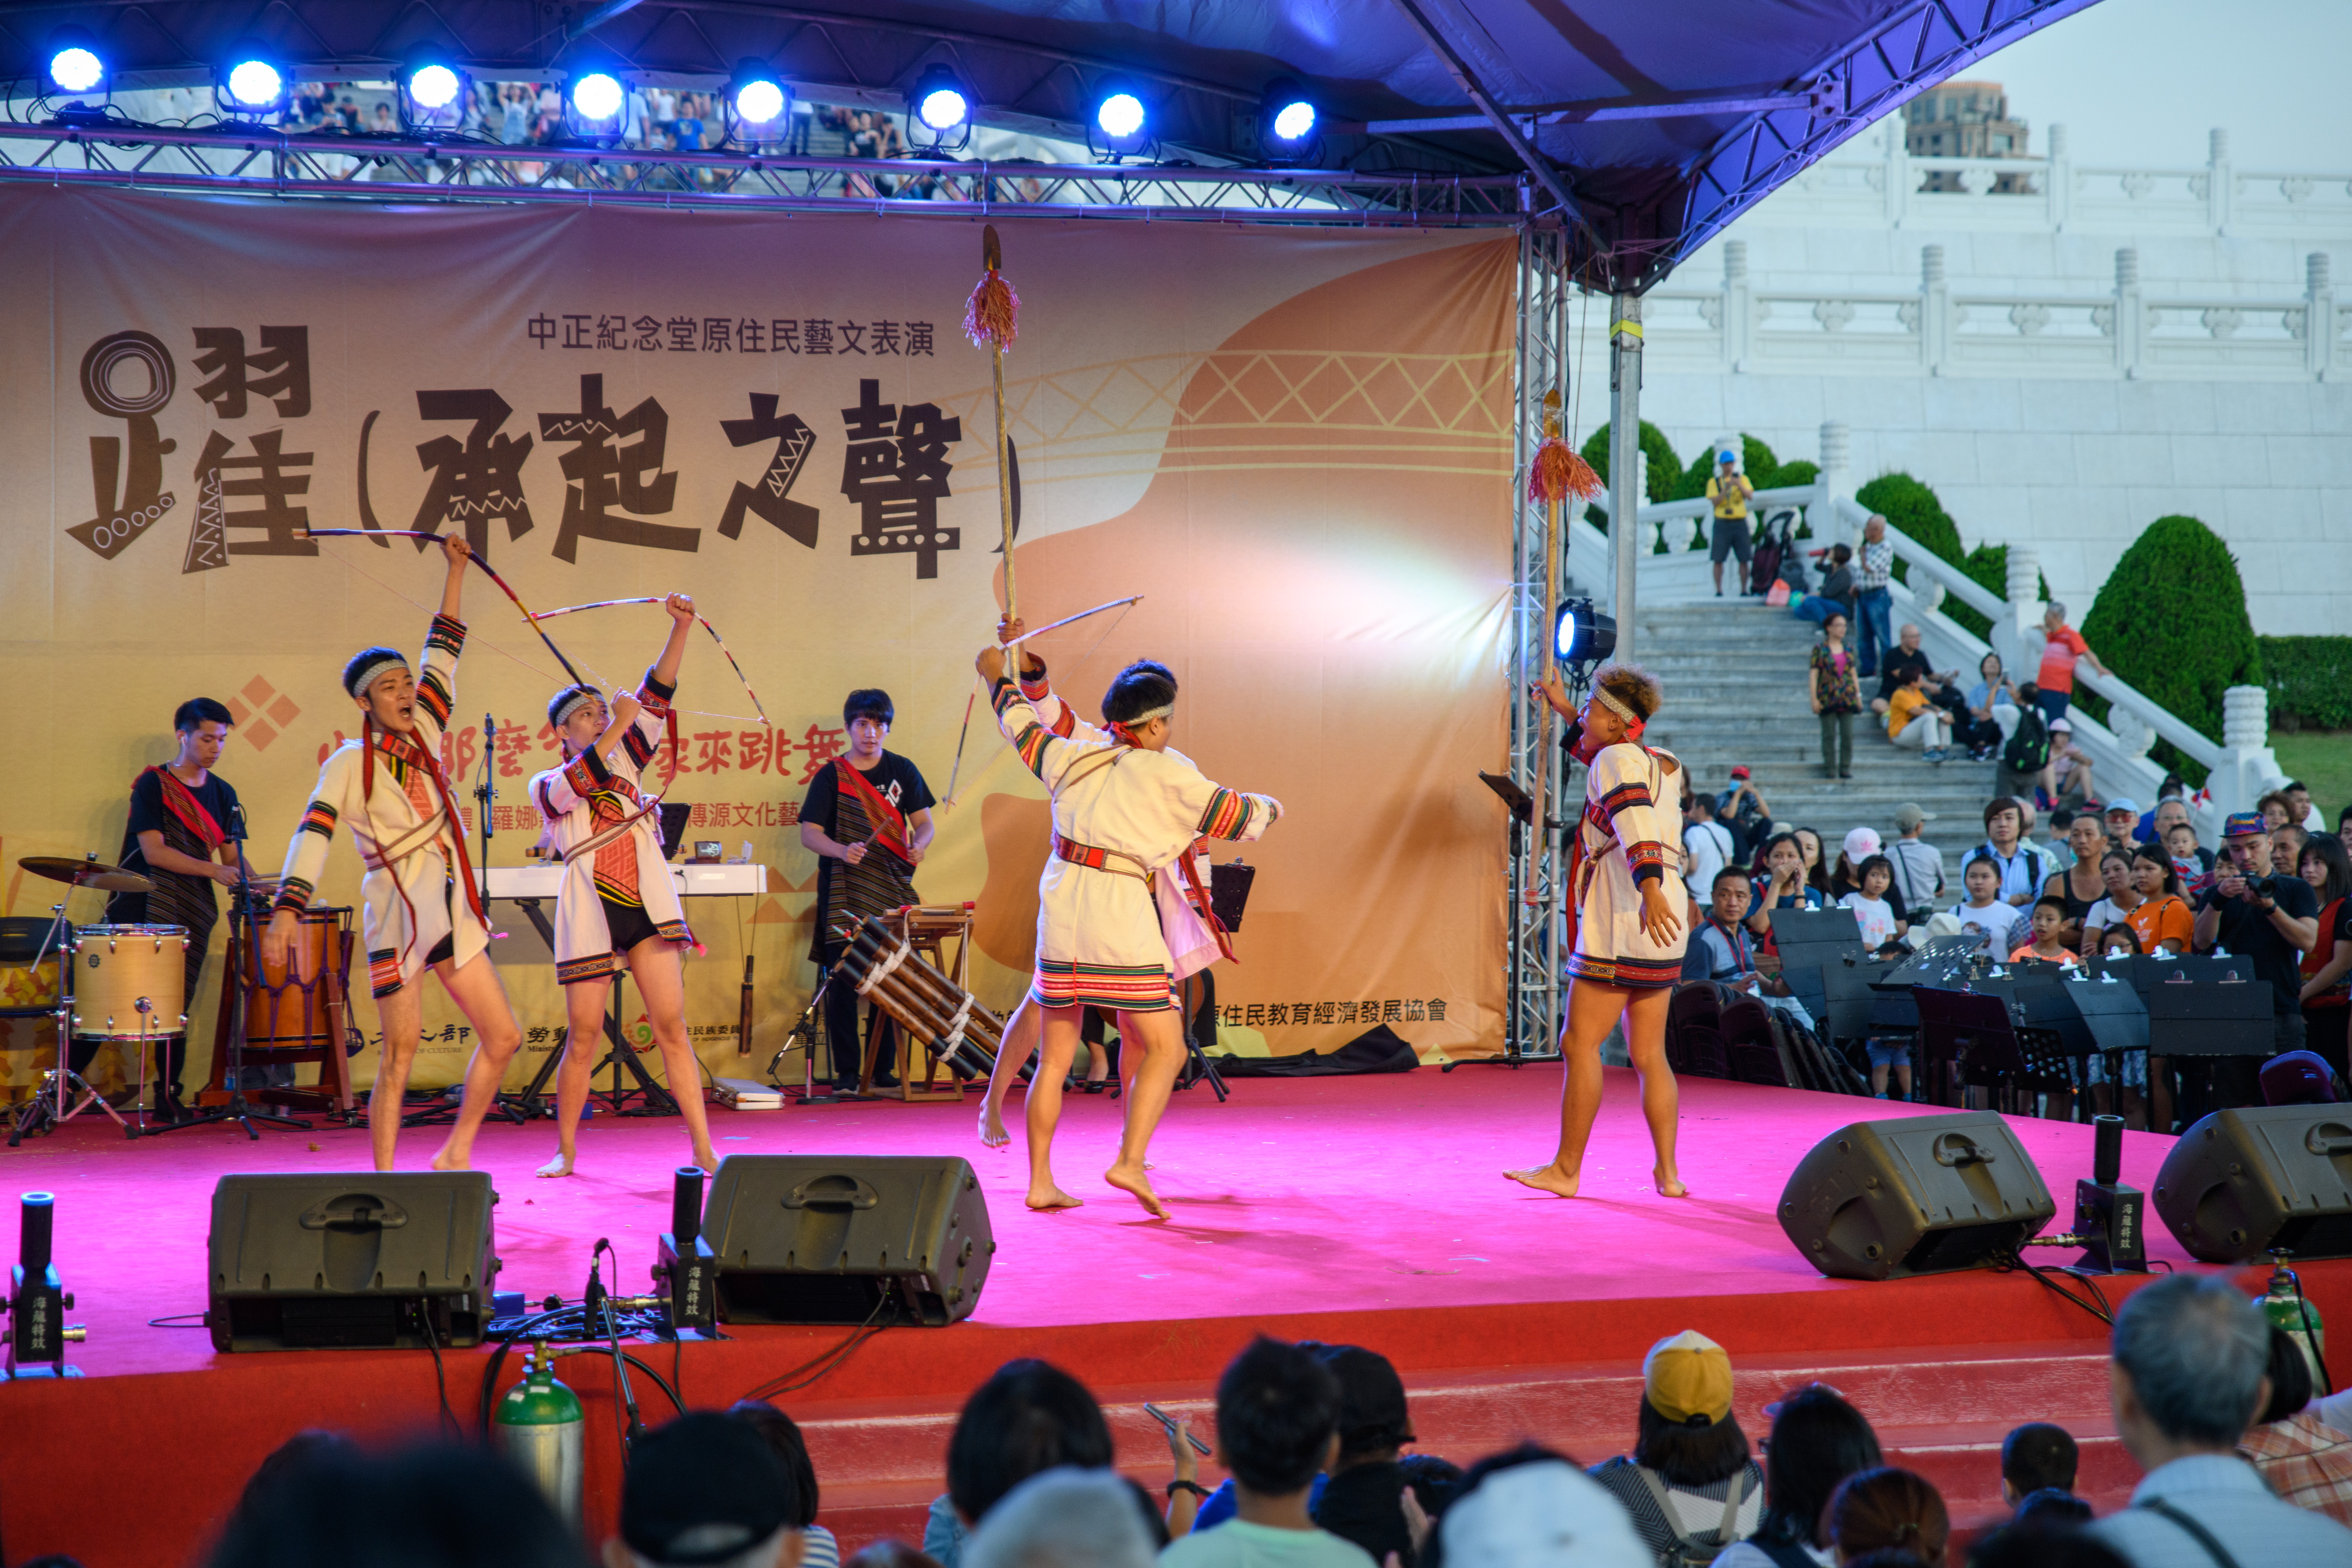 20191010 Taiwanese indigenous peoples' outdoor performance